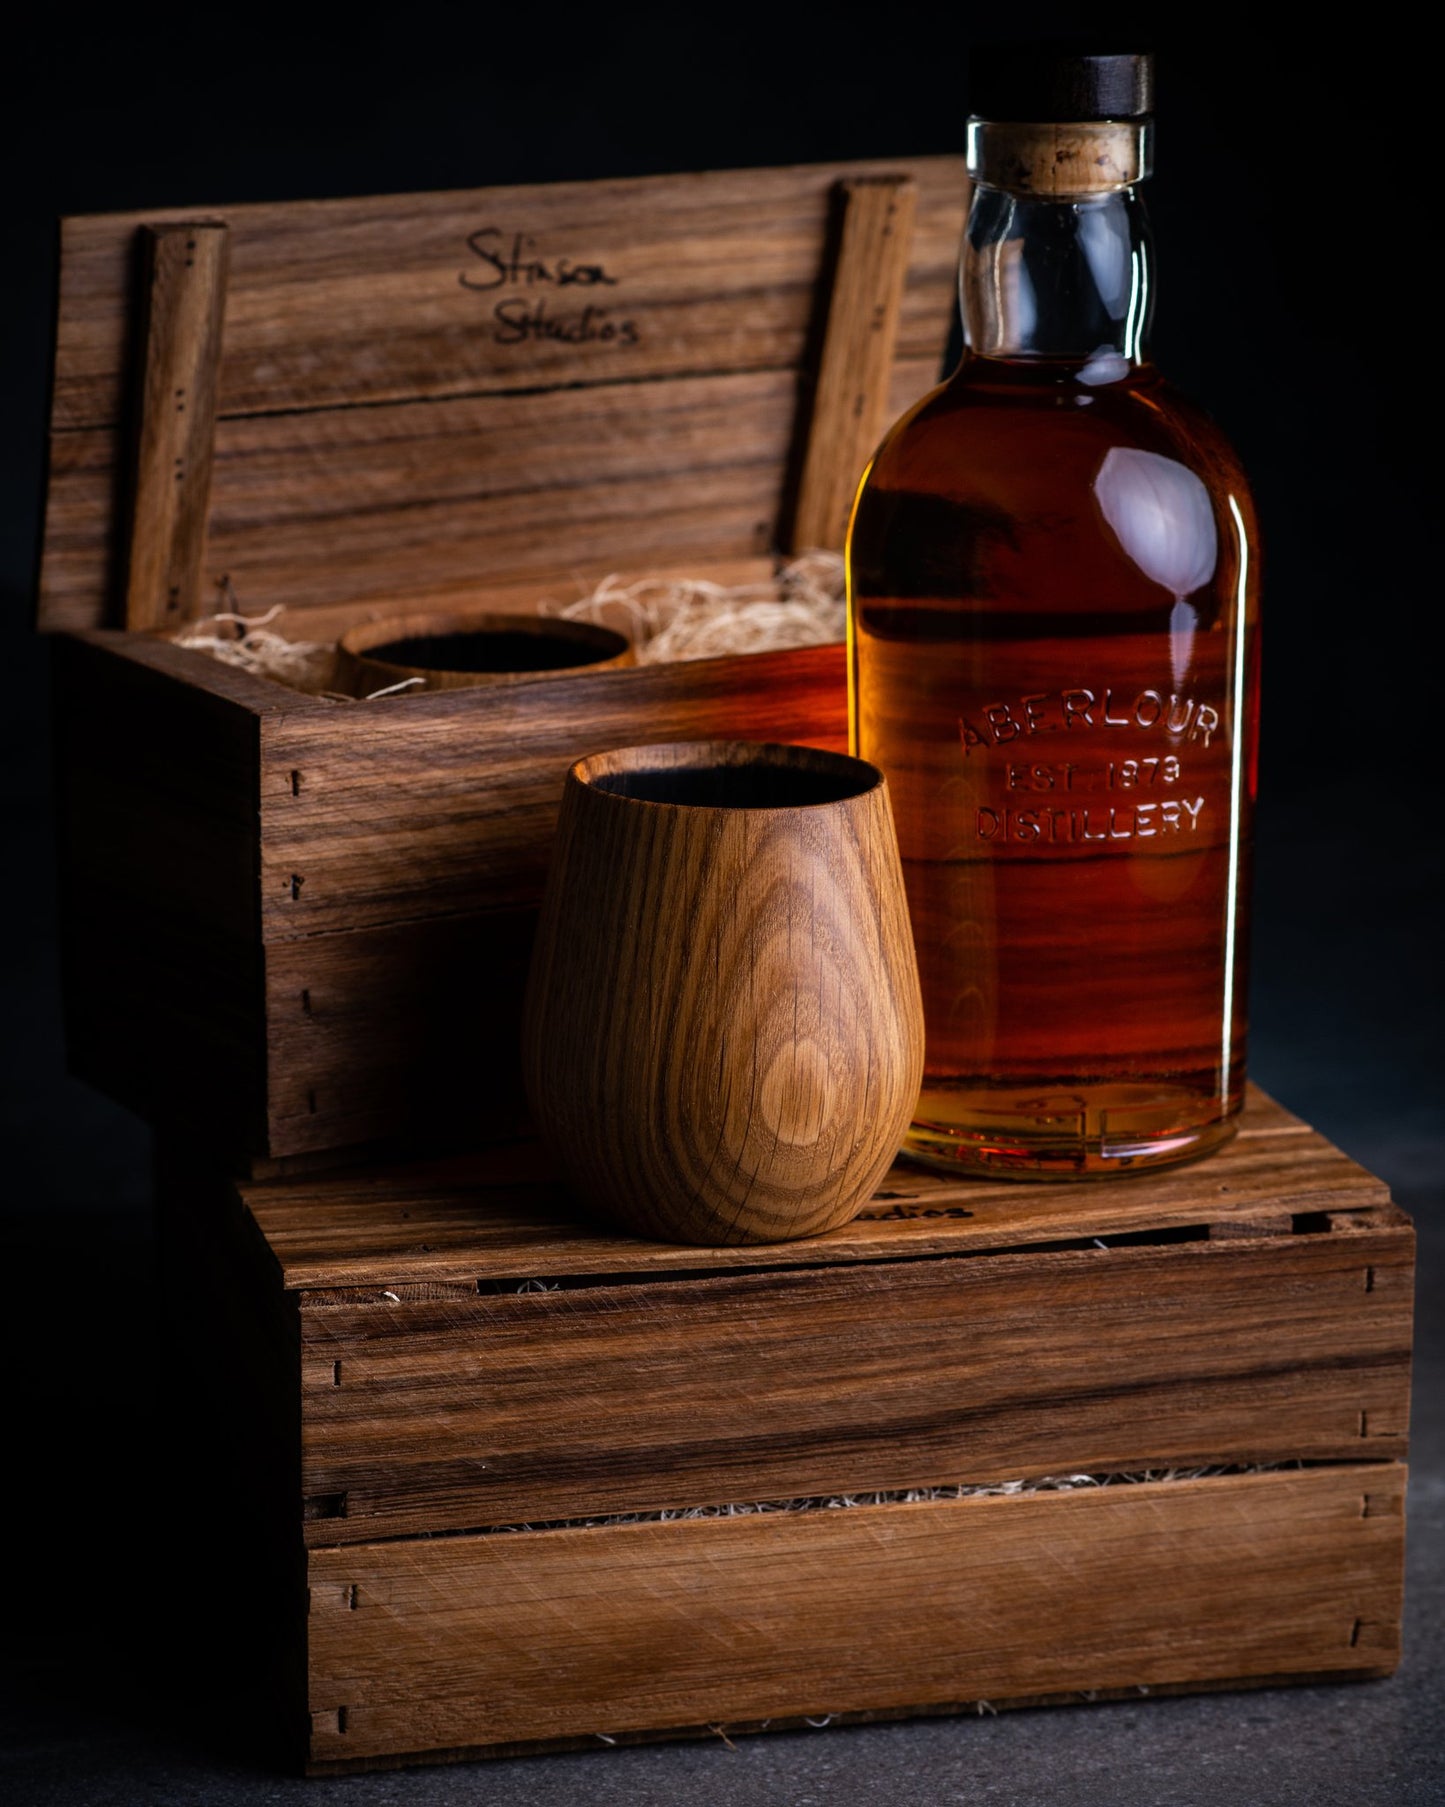 Made in Canada charred oak whiskey tumbler set by Stinson Studios with gift crates and a bottle of whisky.